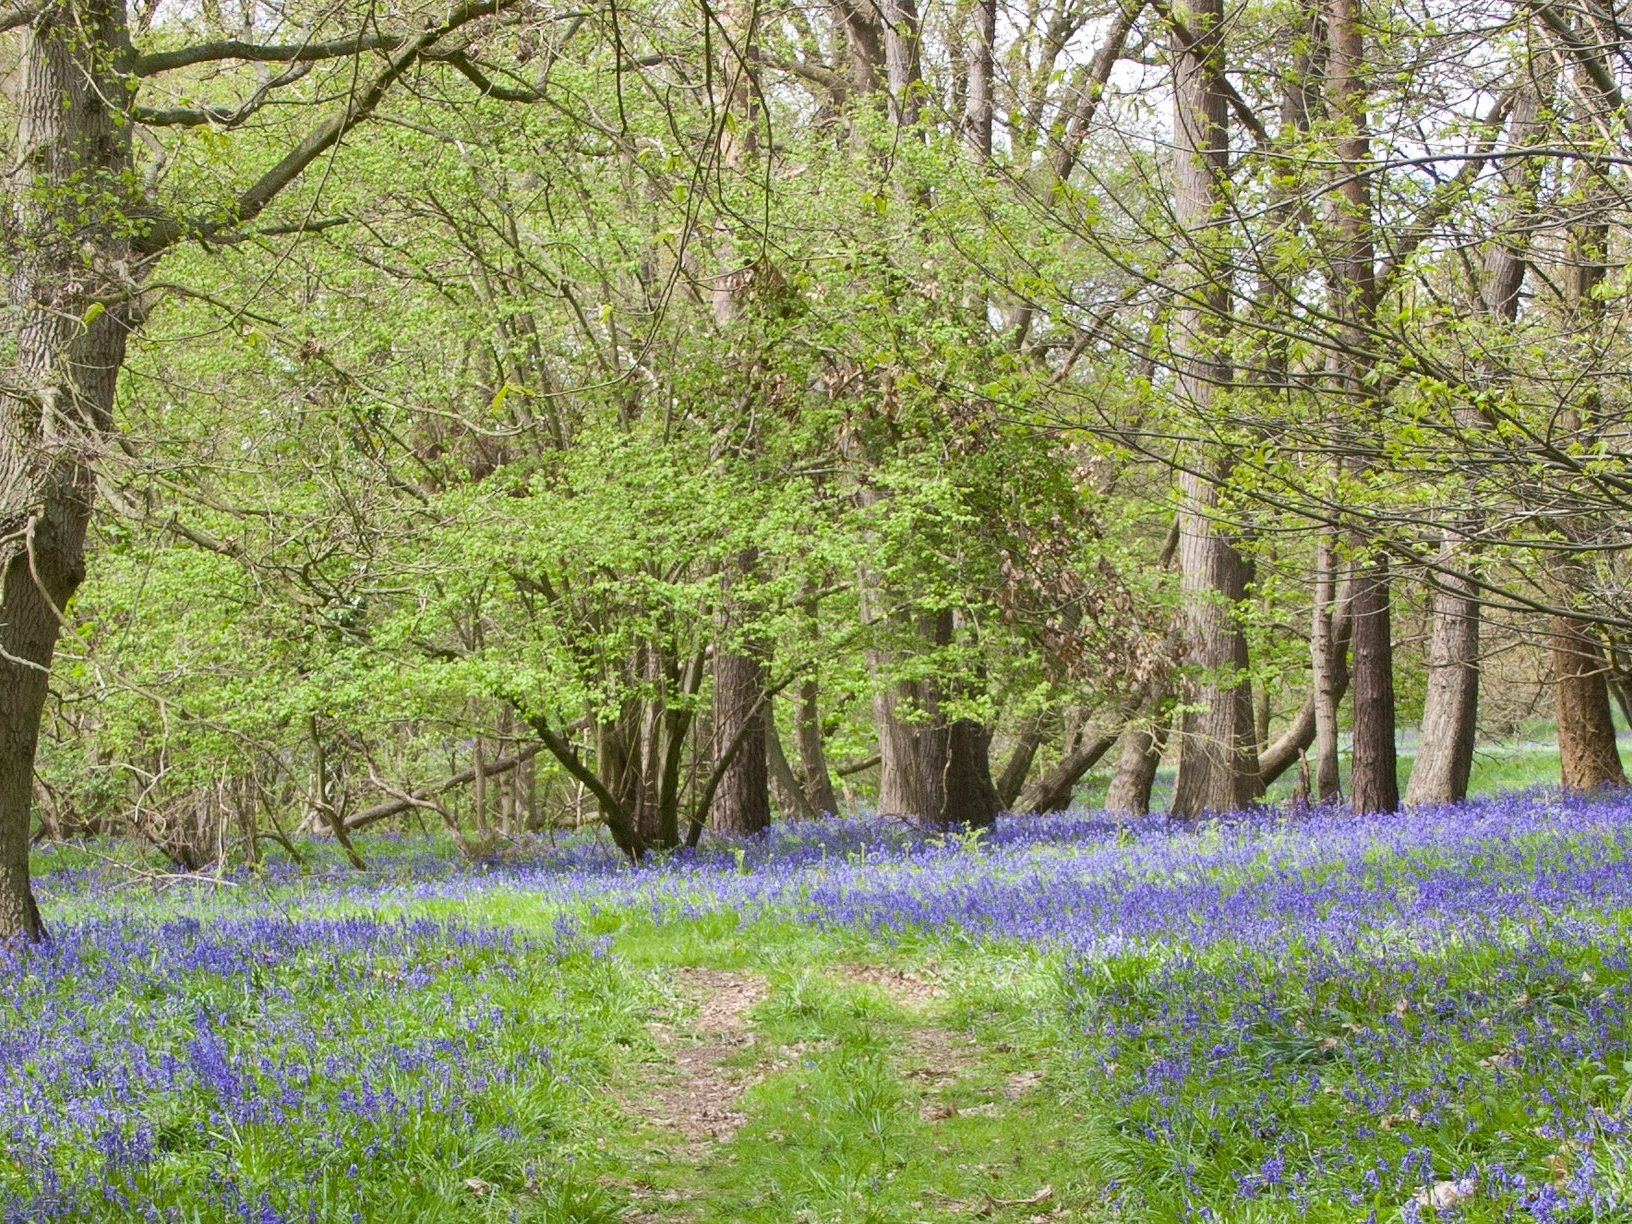 Letterbox+crop+of+the+path+through+the+bluebells+in+Butley+Woods%2C+near+Woodbridge%2C+Suffolk..jpg